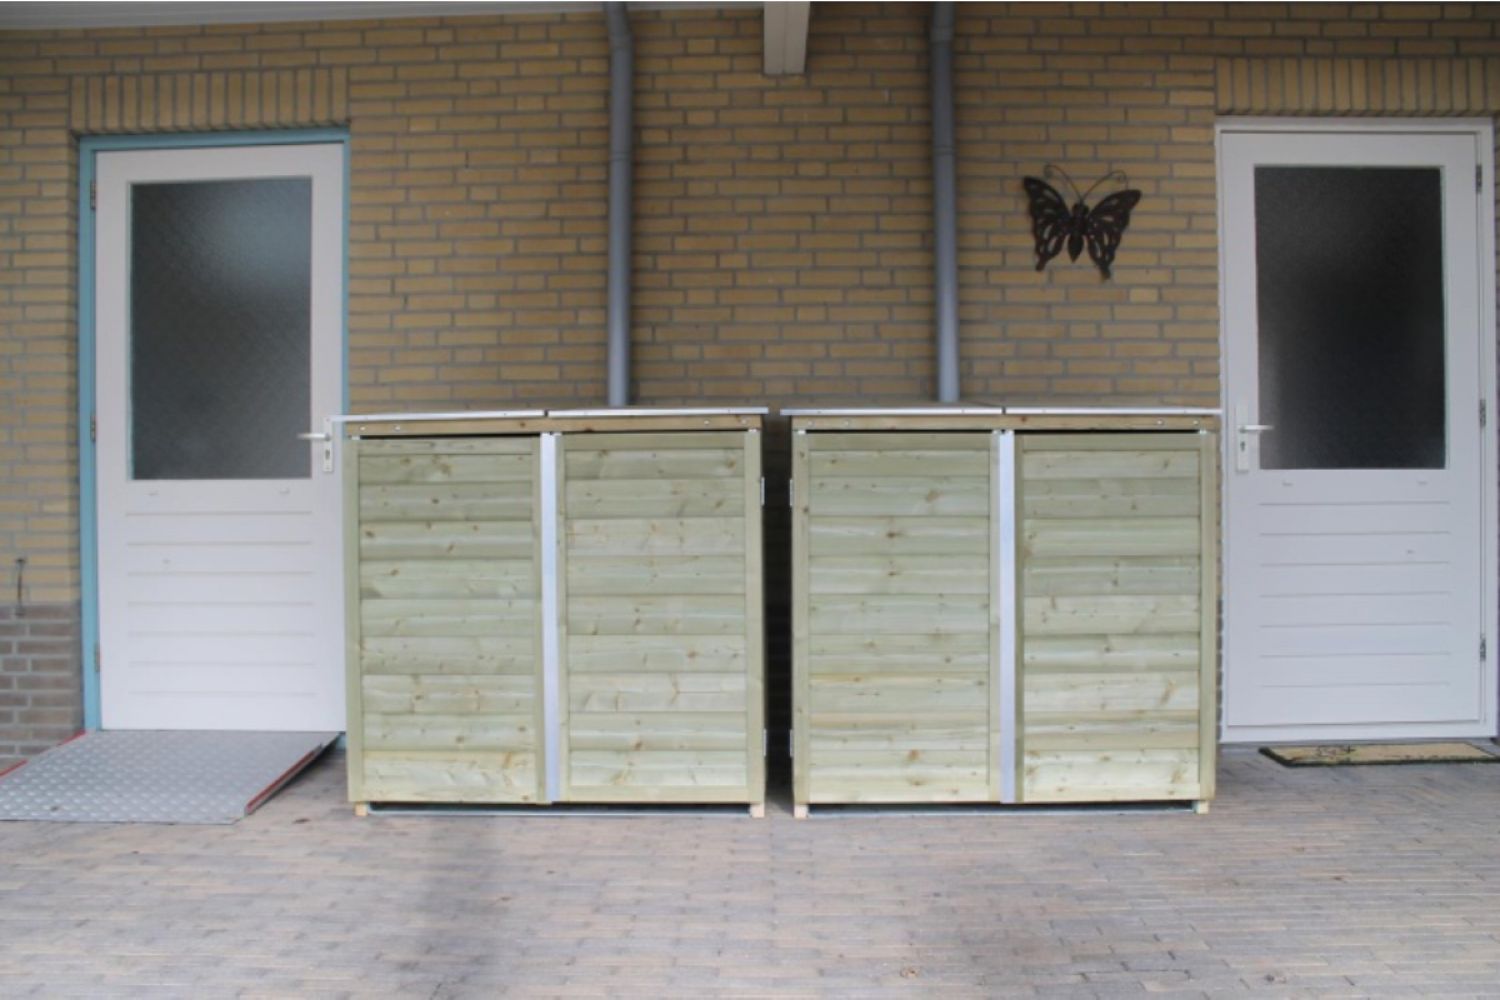 Containerberging 125x65x108,5 cm - 120L